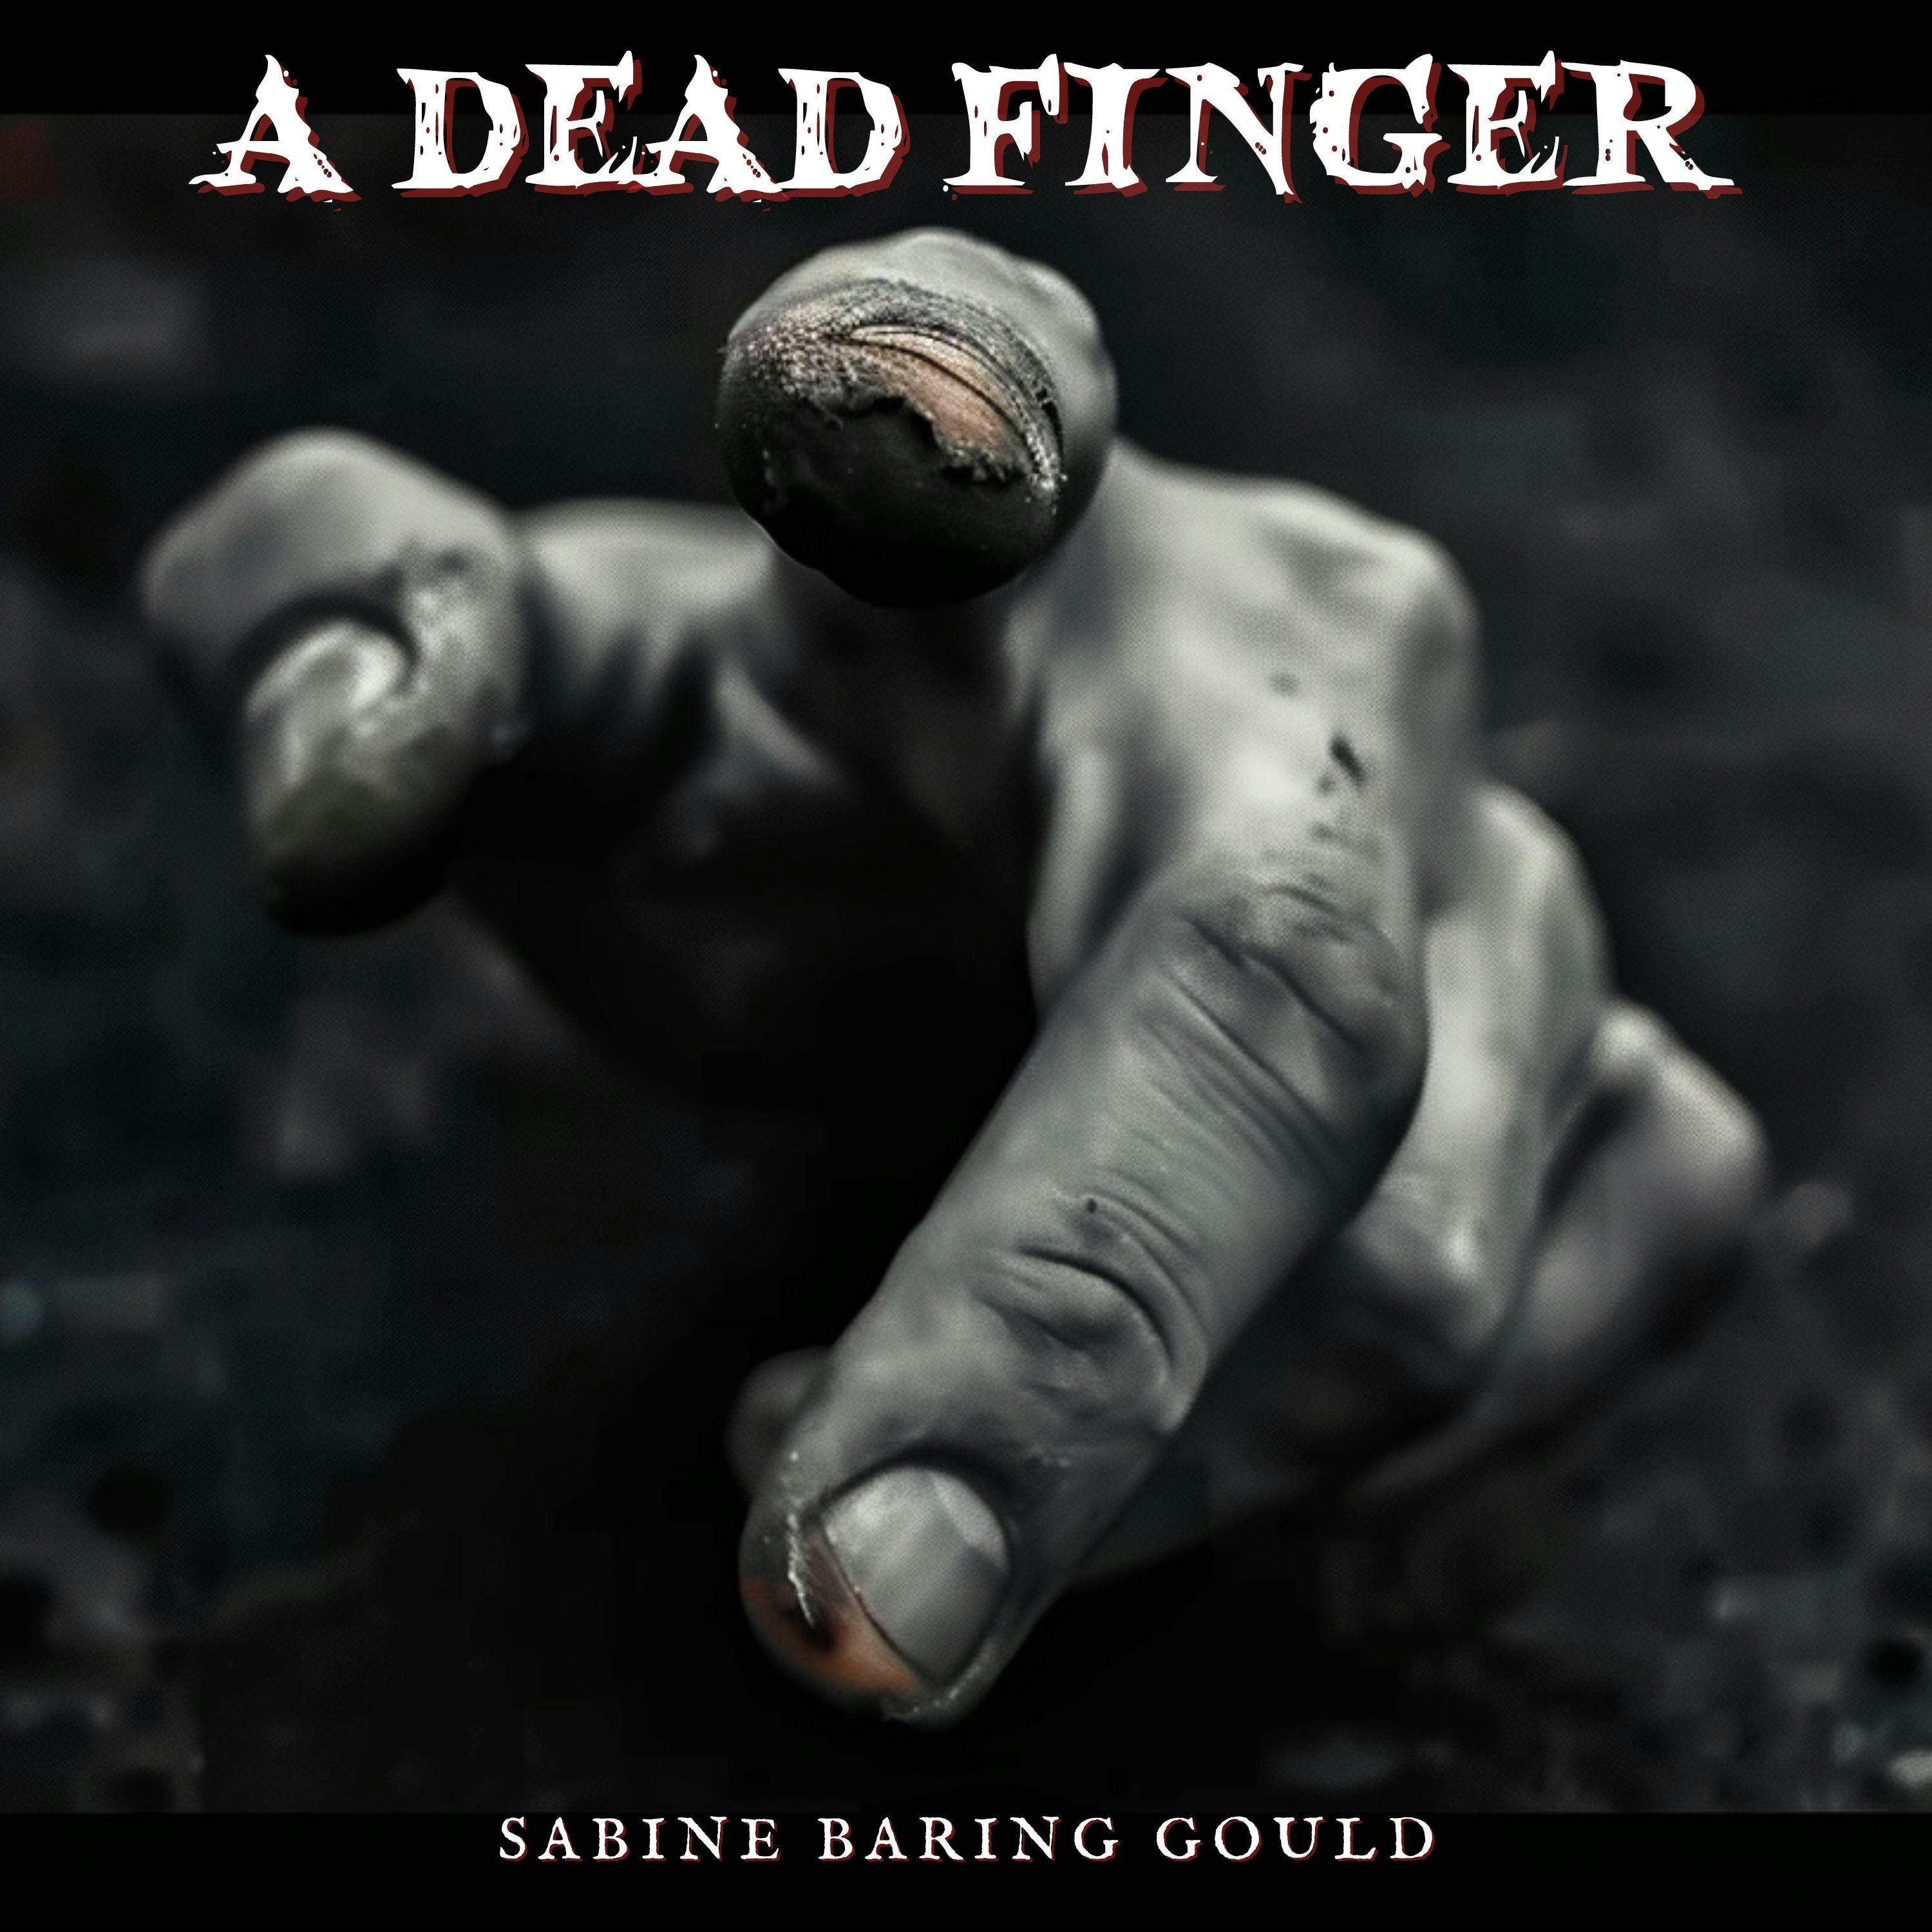 A Dead Finger by Sabine Baring Gould